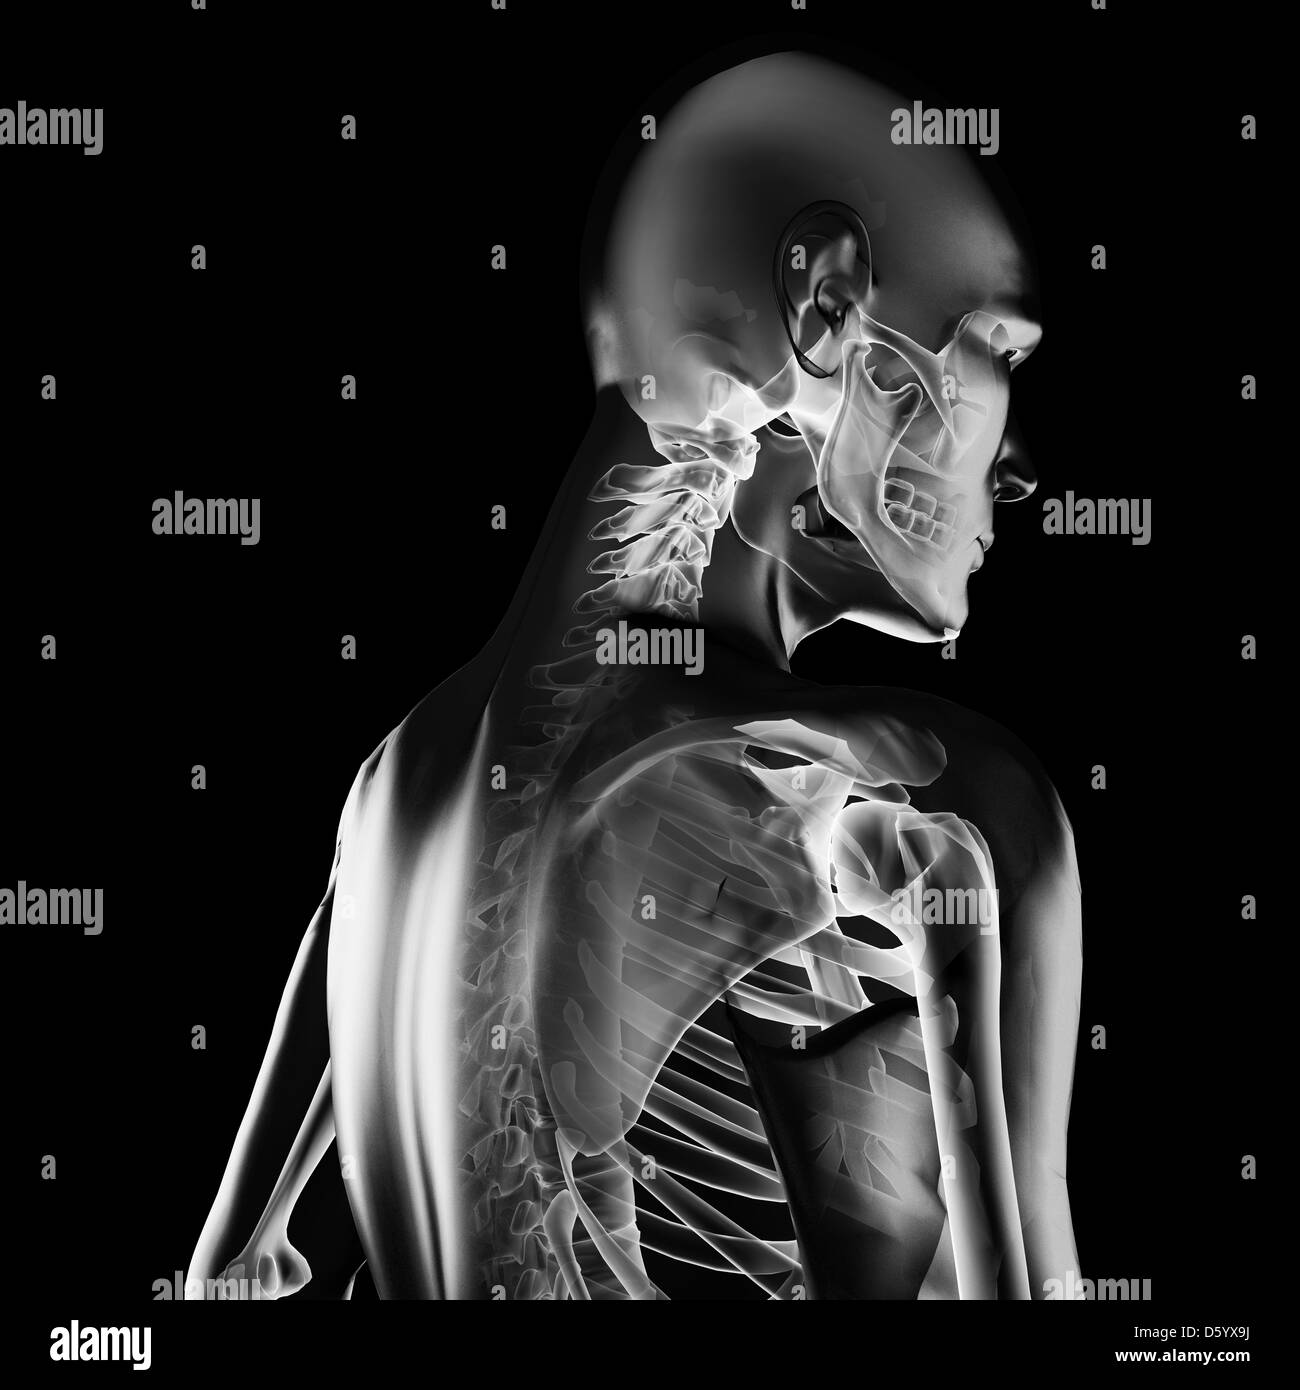 Xray scan Black and White Stock Photos & Images - Alamy